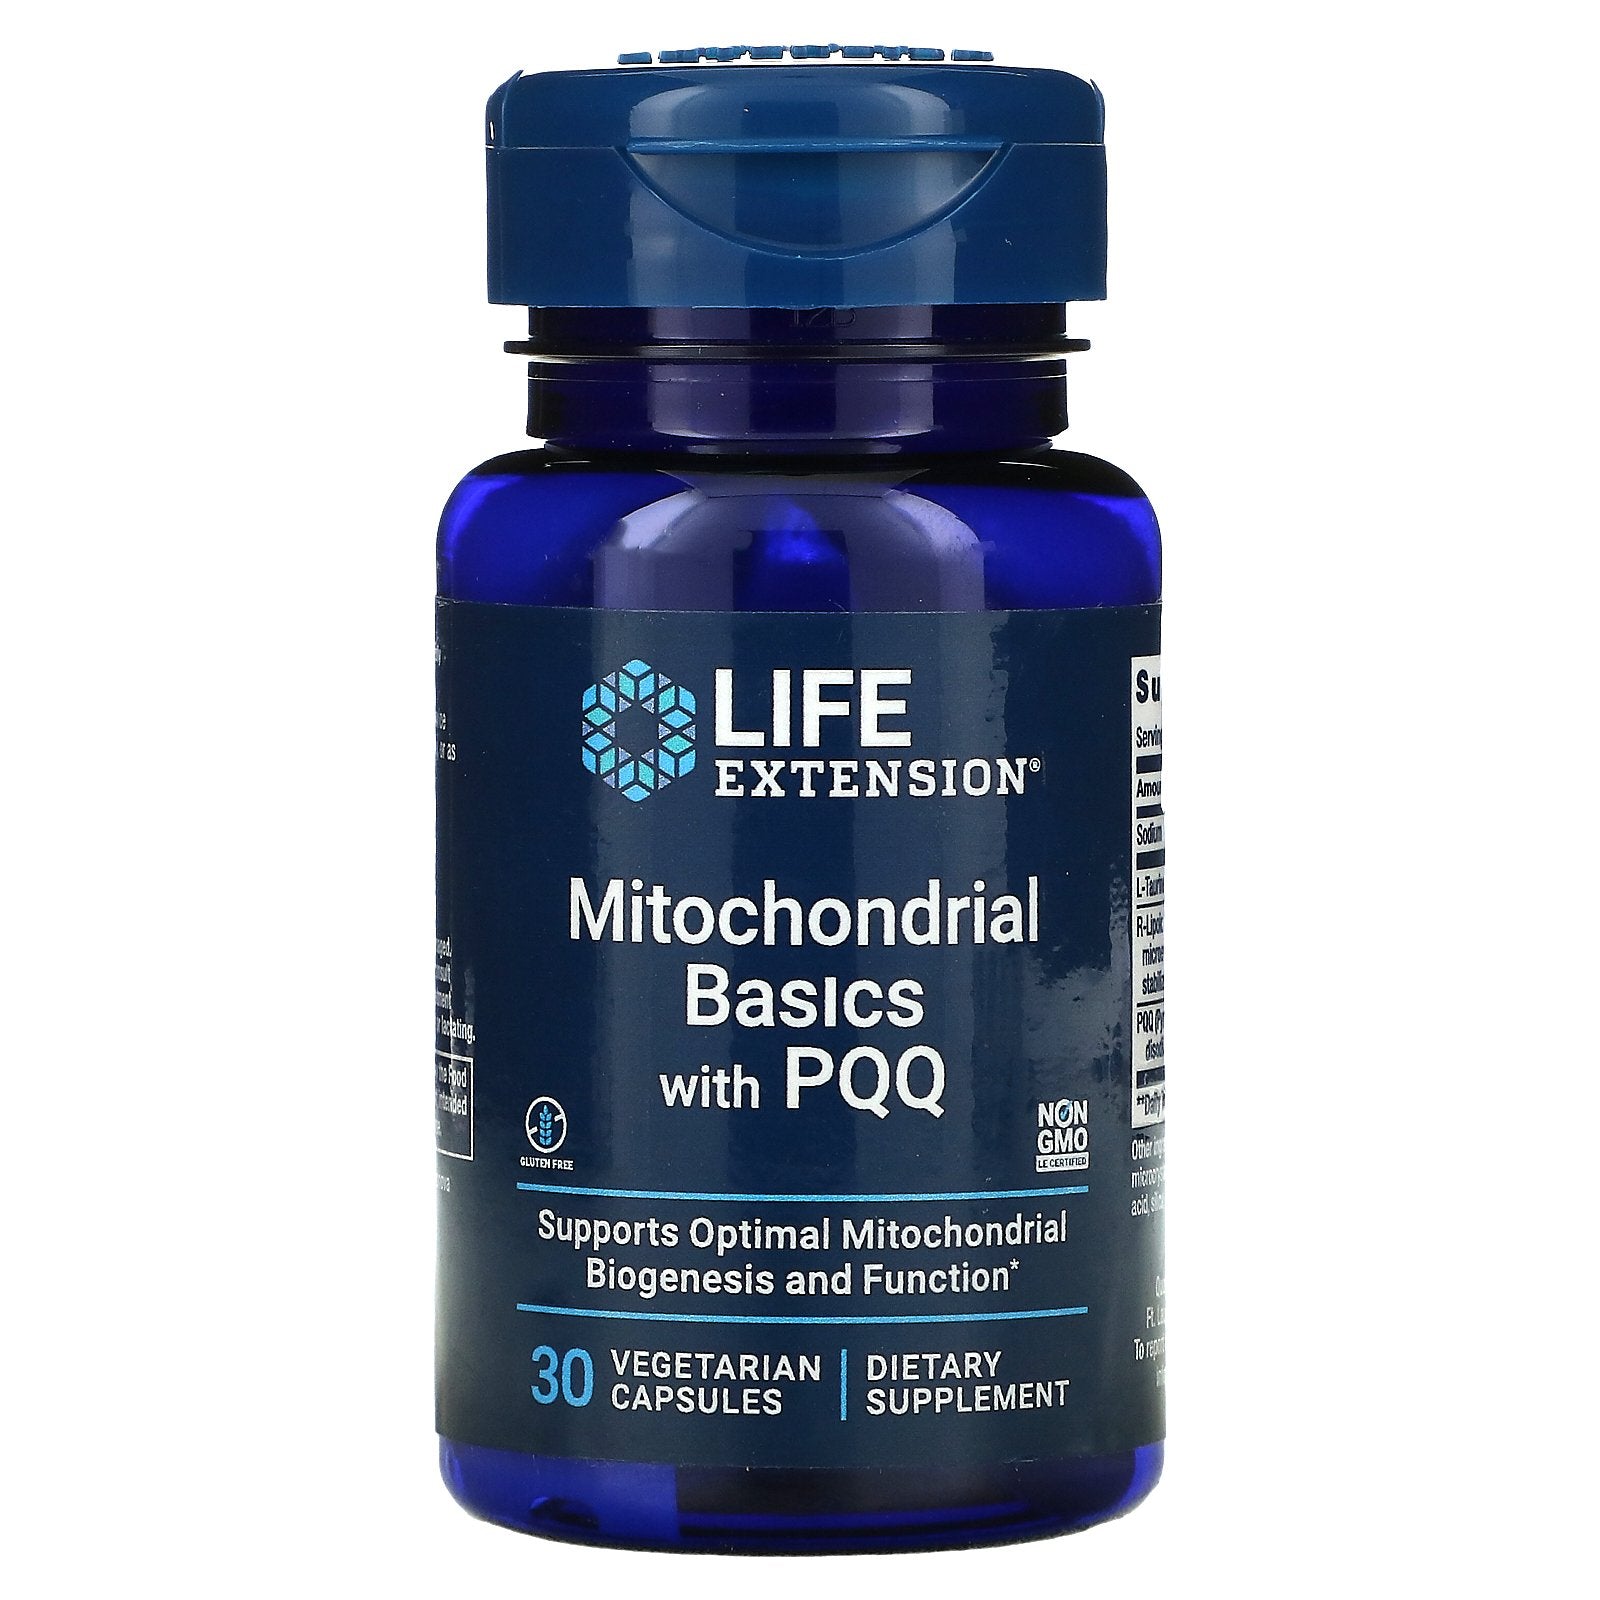 Life Extension, Mitochondrial Basics with PQQ Vegetable Capsules